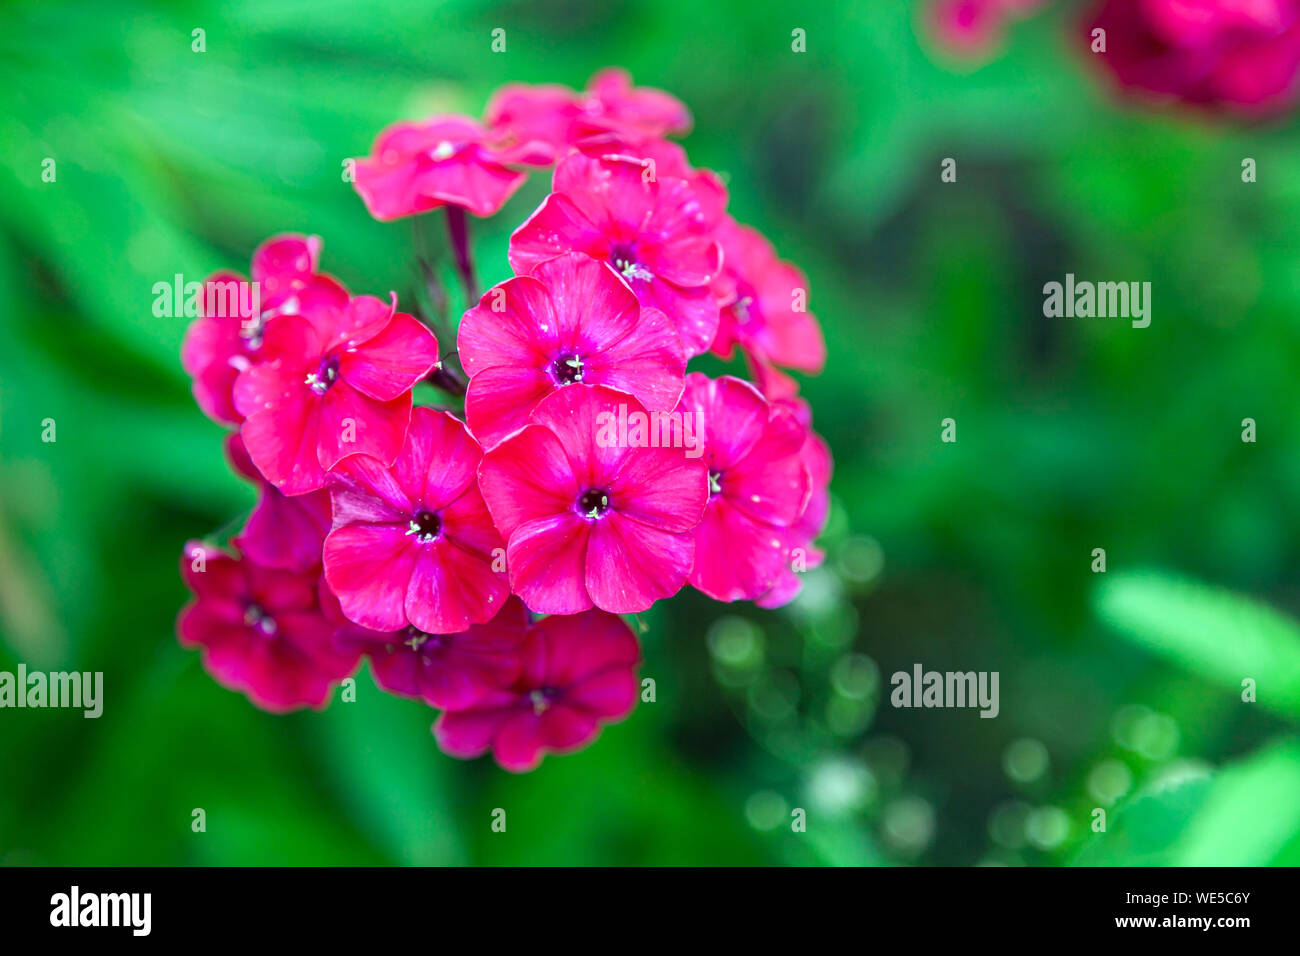 Close-up beautiful fresh pink royal phlox flower on a background of green grass grows in a home garden, top view Stock Photo